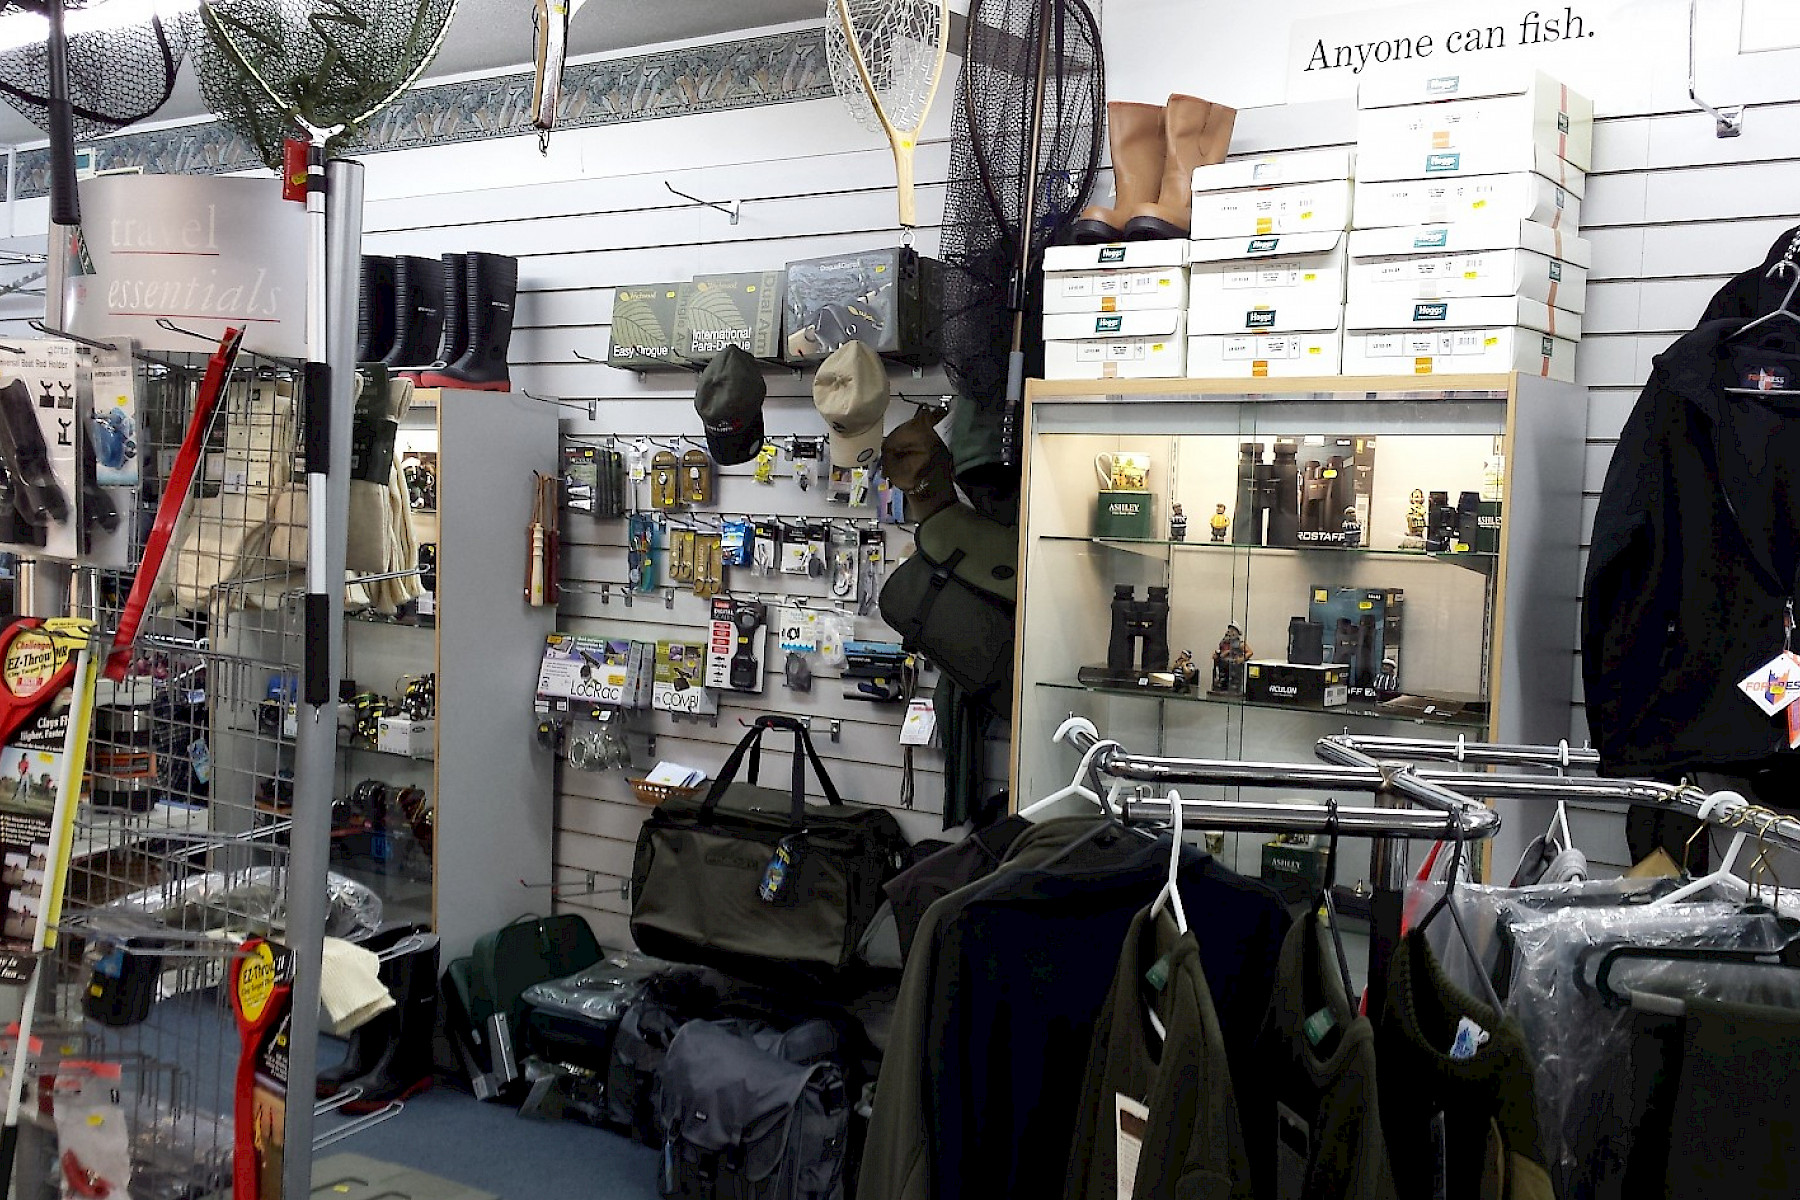 Fly fishing equipment, in Rosyth, Fife